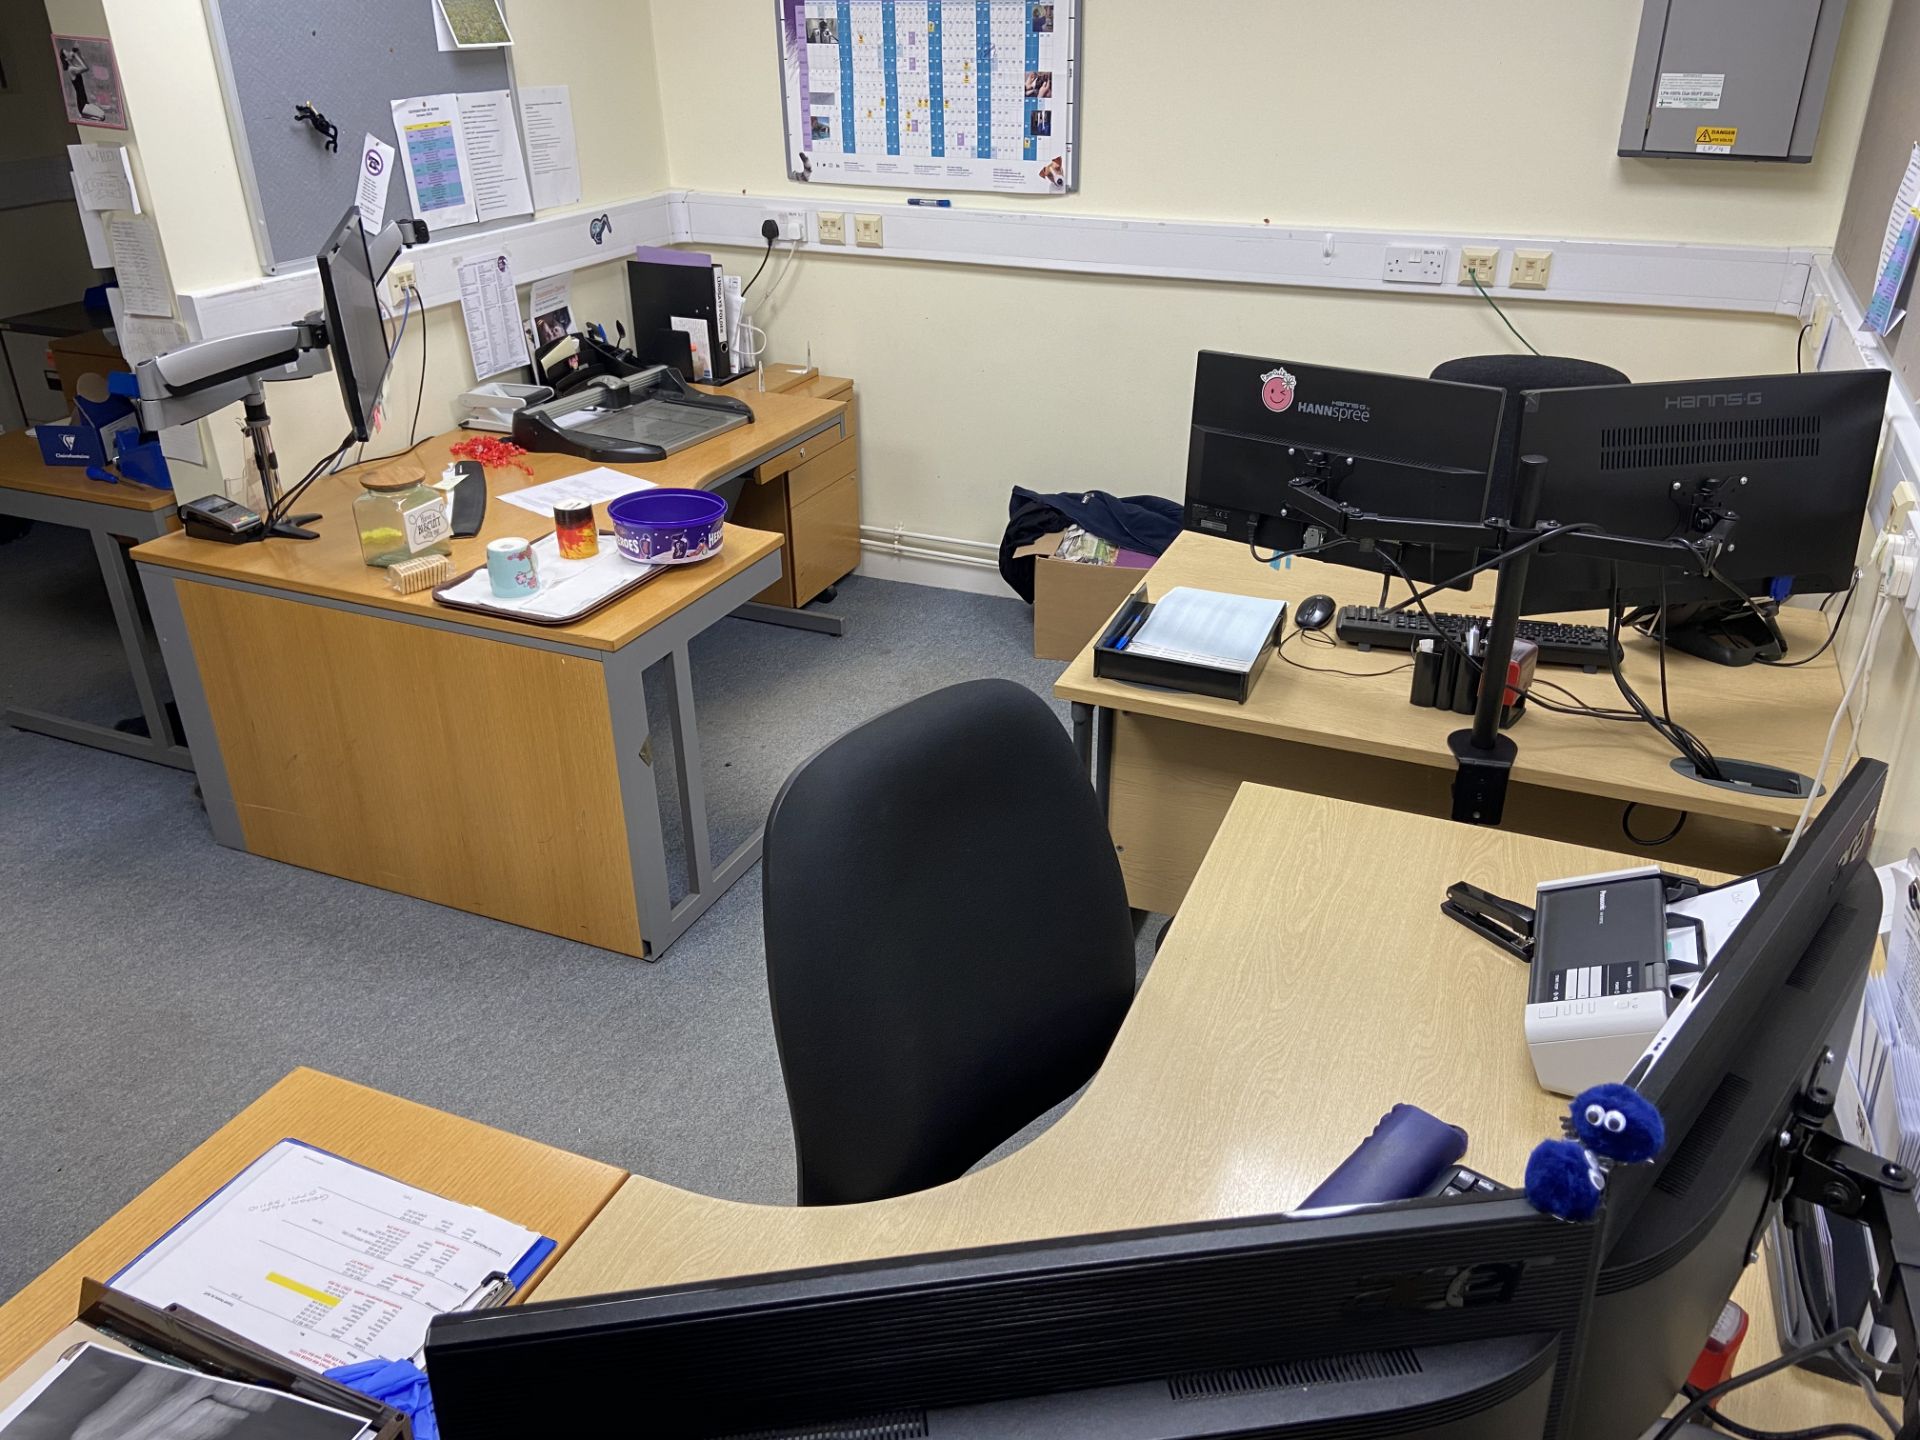 Range of office furniture throughout the small animal clinic. Ergo Desks x 30, Desks x banks of 6 - Image 11 of 15